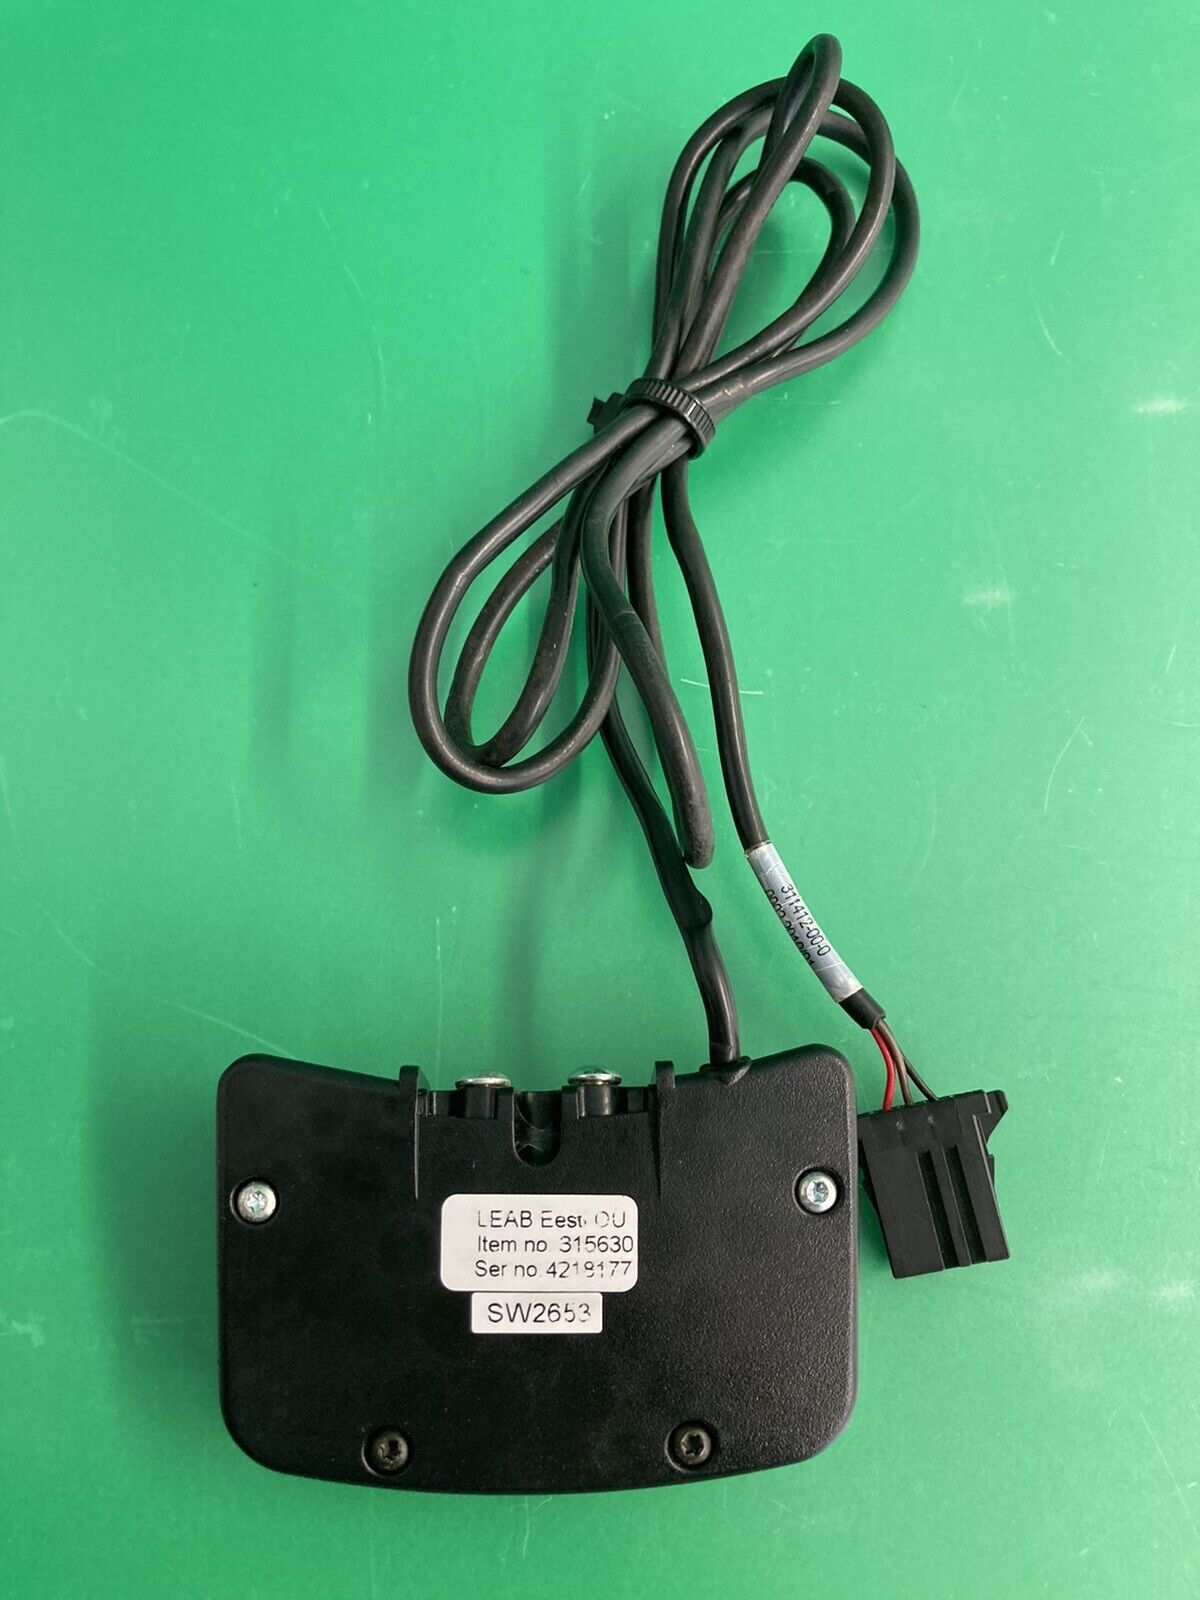 Permobil ICS Switchbox Power Seat Control Keypad 315630 for Powerchairs #H844